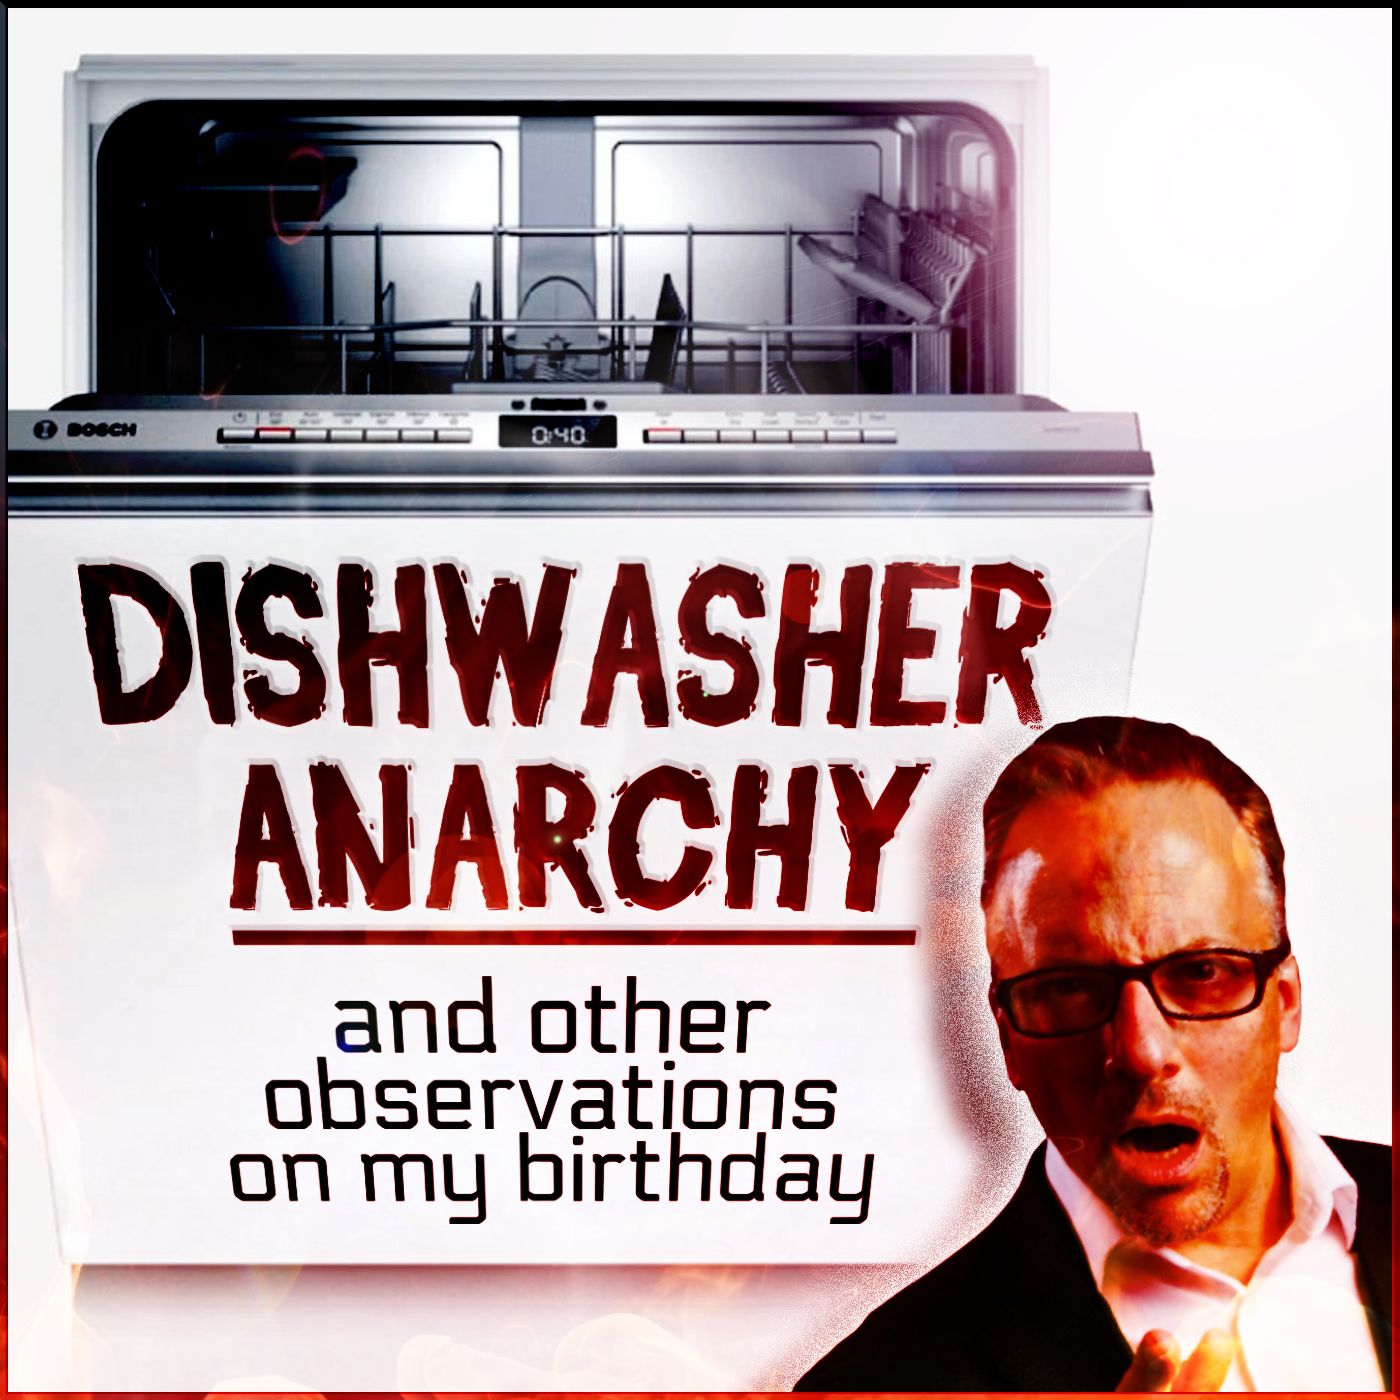 Dishwasher Anarchy (and other observations on my birthday)